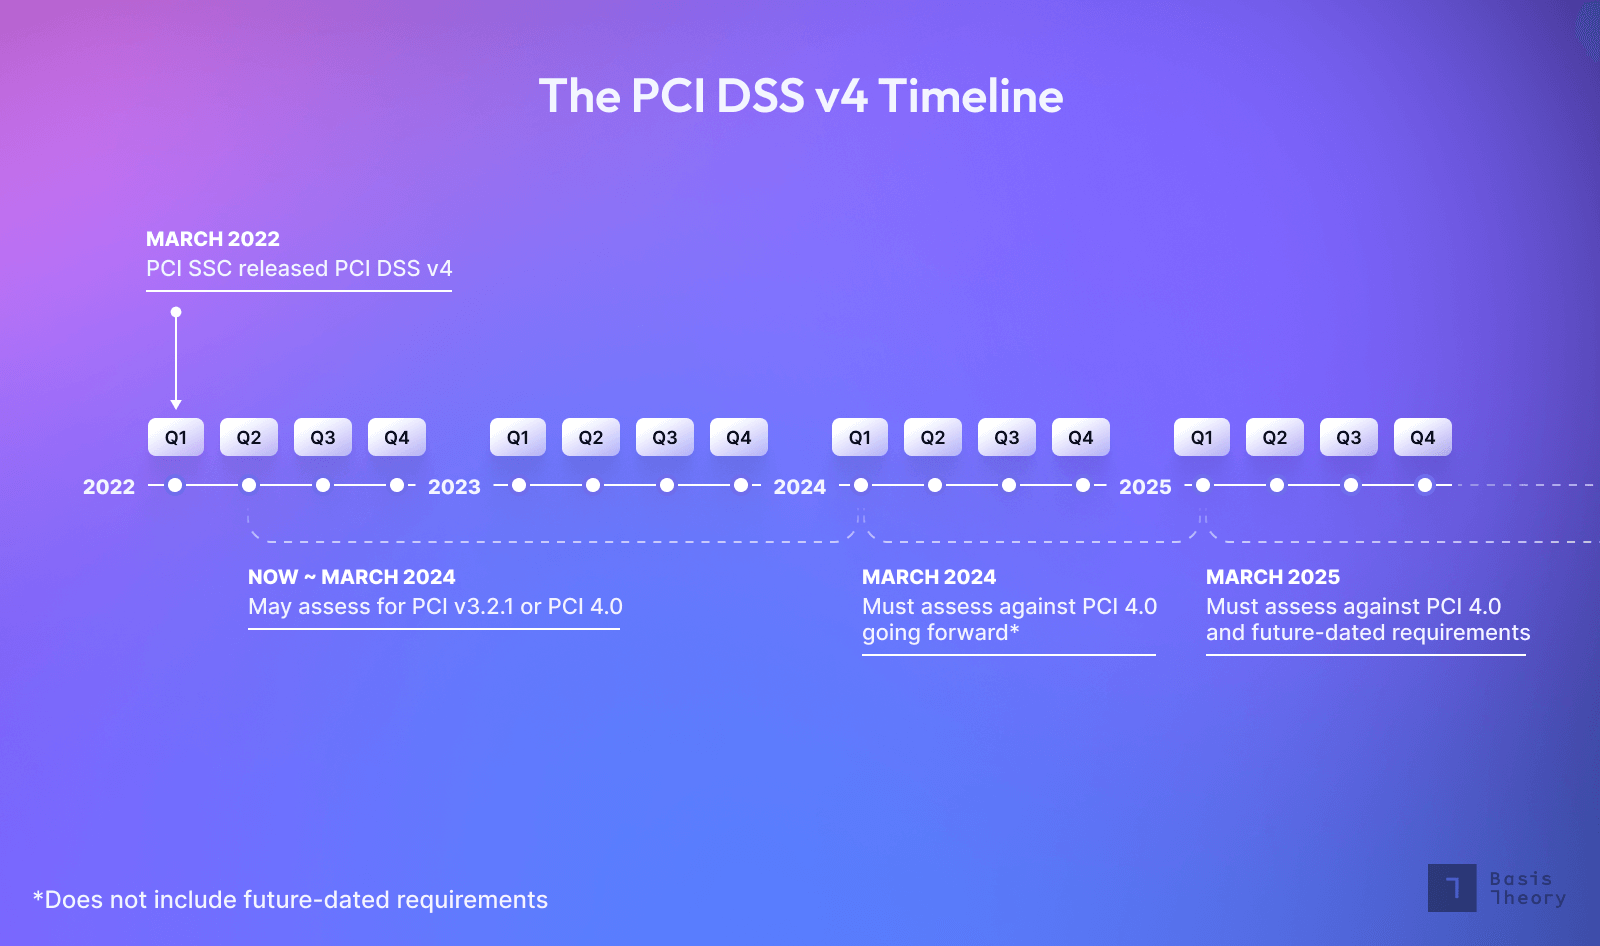 Timeline outlining the key dates for transitioning from PCI DSS version 3.2.1 to 4.0.